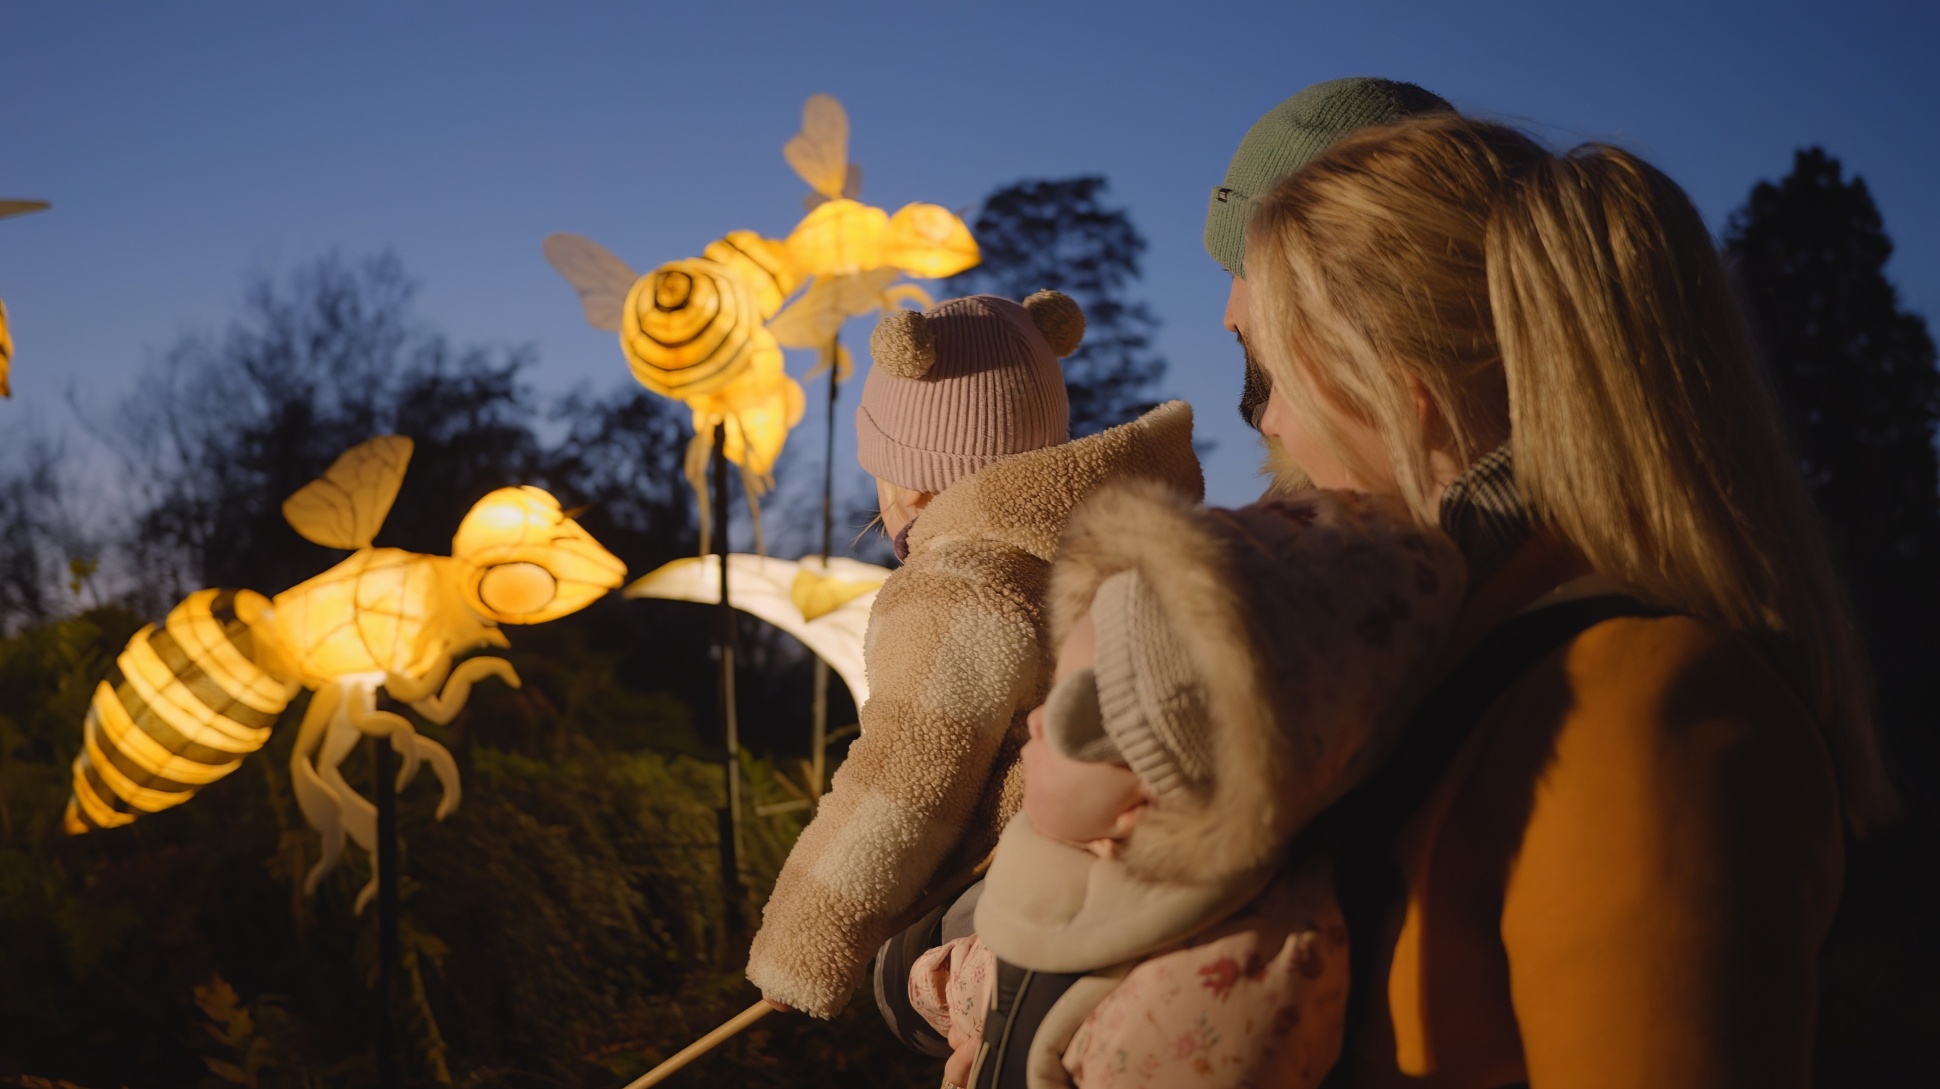 A young child reaches out to illuminated paper lanterns shaped like bees